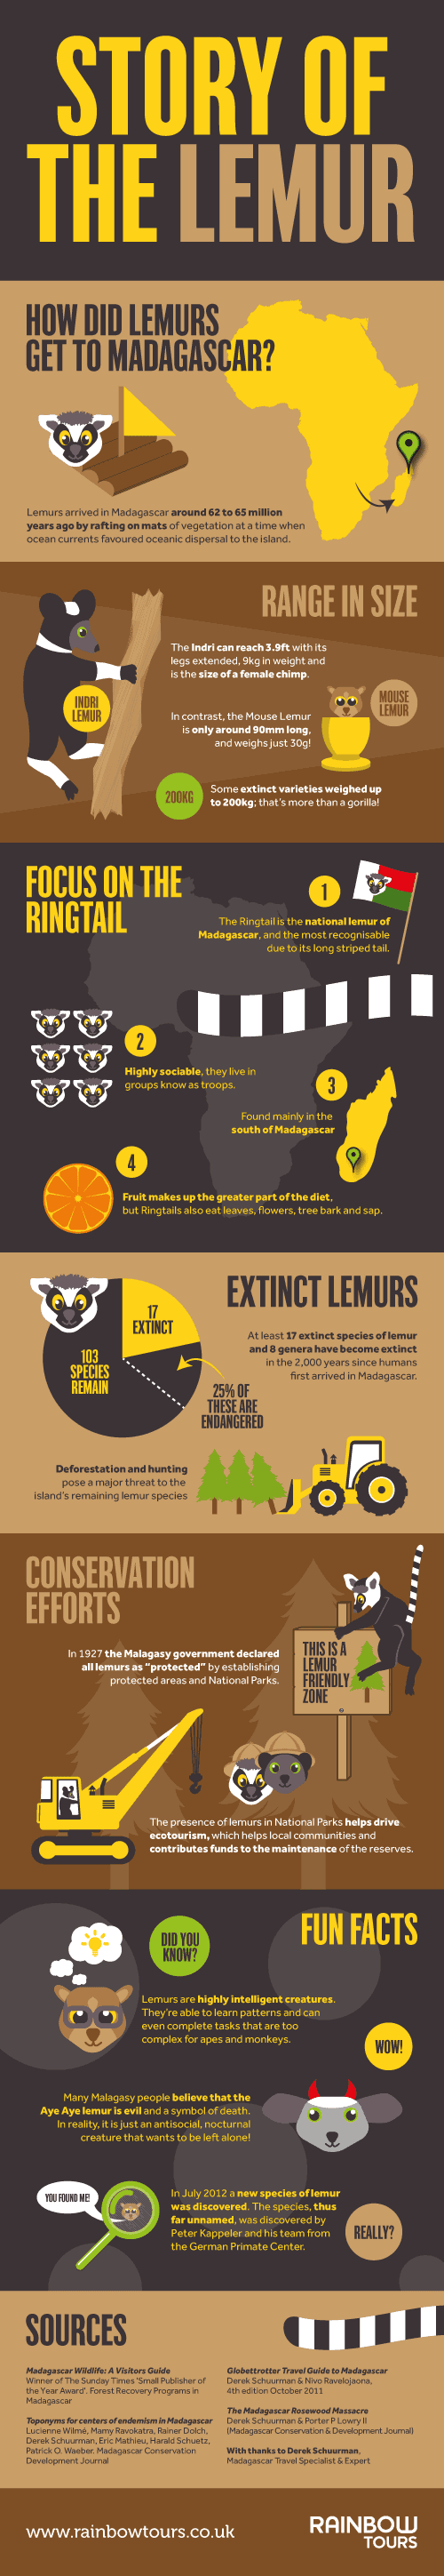 Story of the Lemur infographic